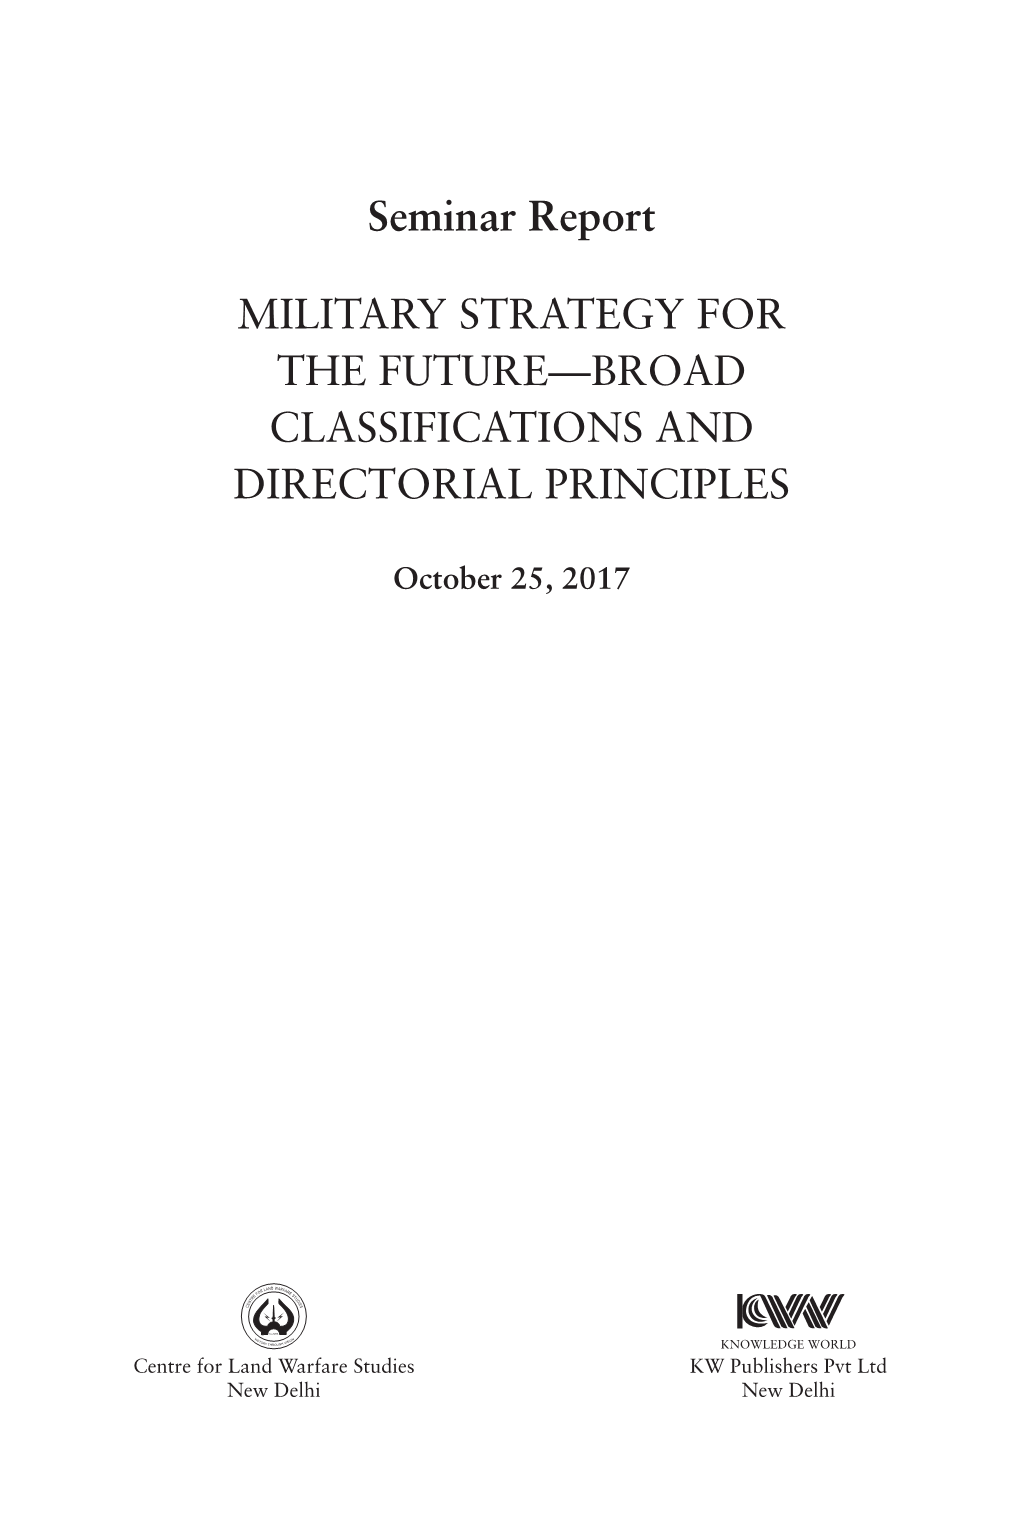 Military Strategy for the Future—Broad Classifications and Directorial Principles